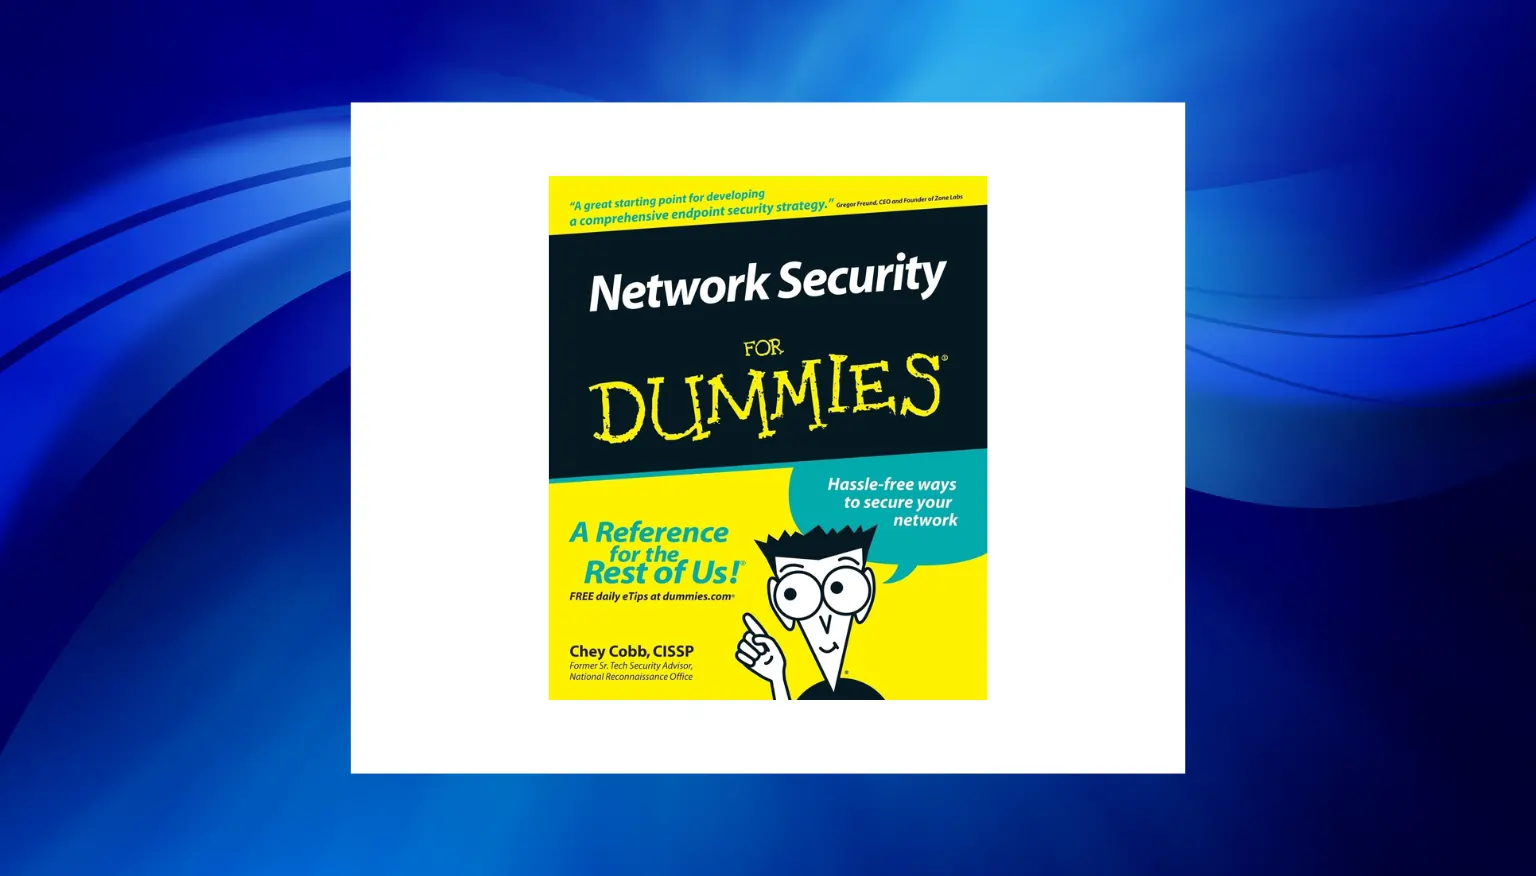 best network security books - Network Security for Dummies by Chey Cobb